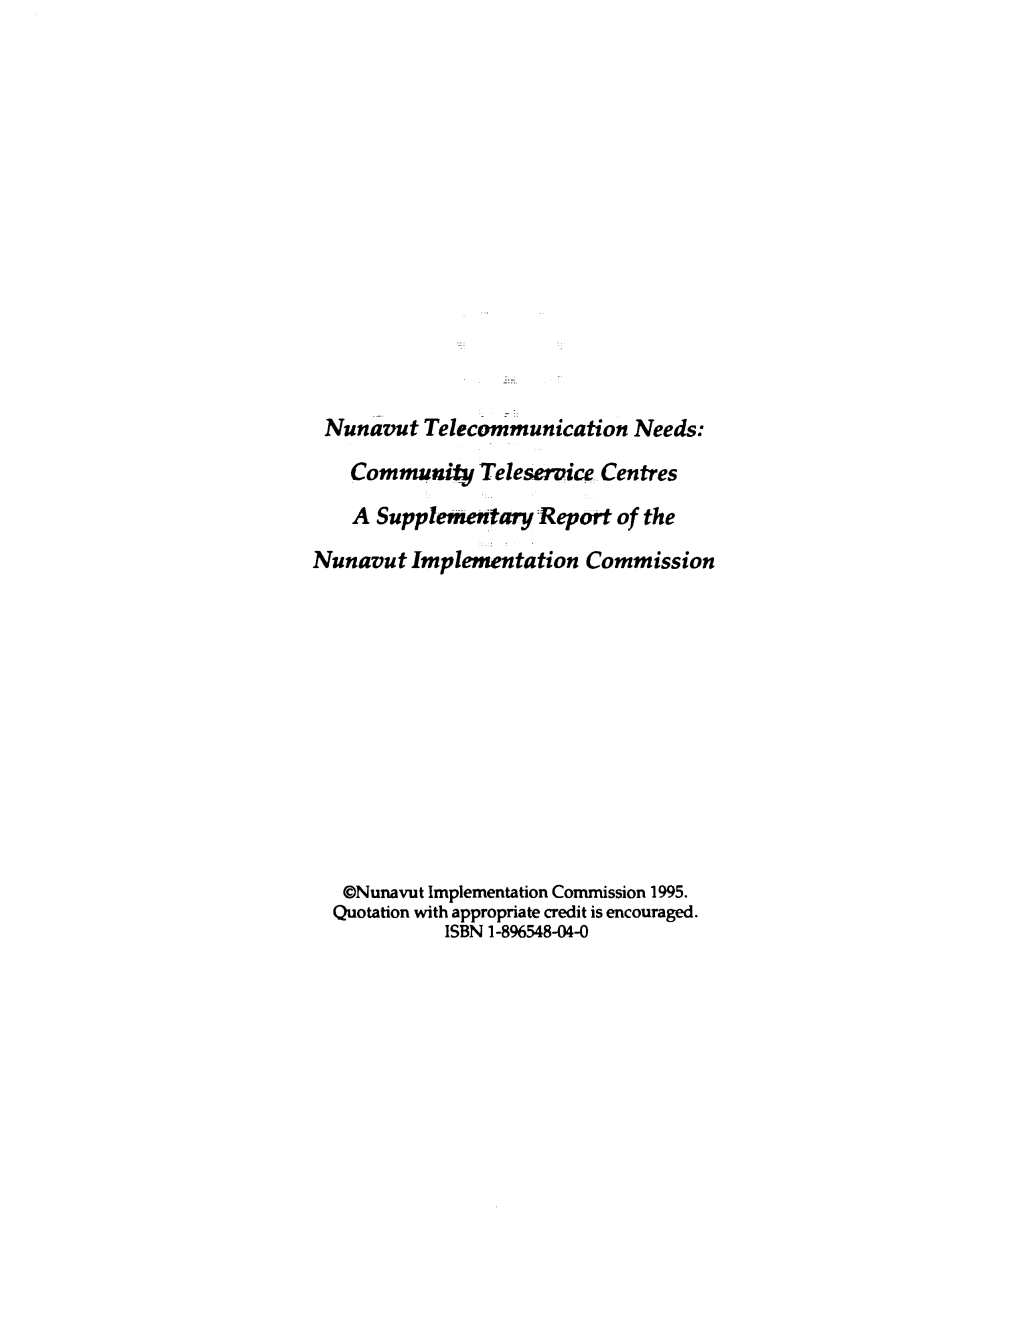 Nunavut Telecommunication Needs: Comma* Telemice Centres a Supplementmy Report of the Nunavut Implementation Commission